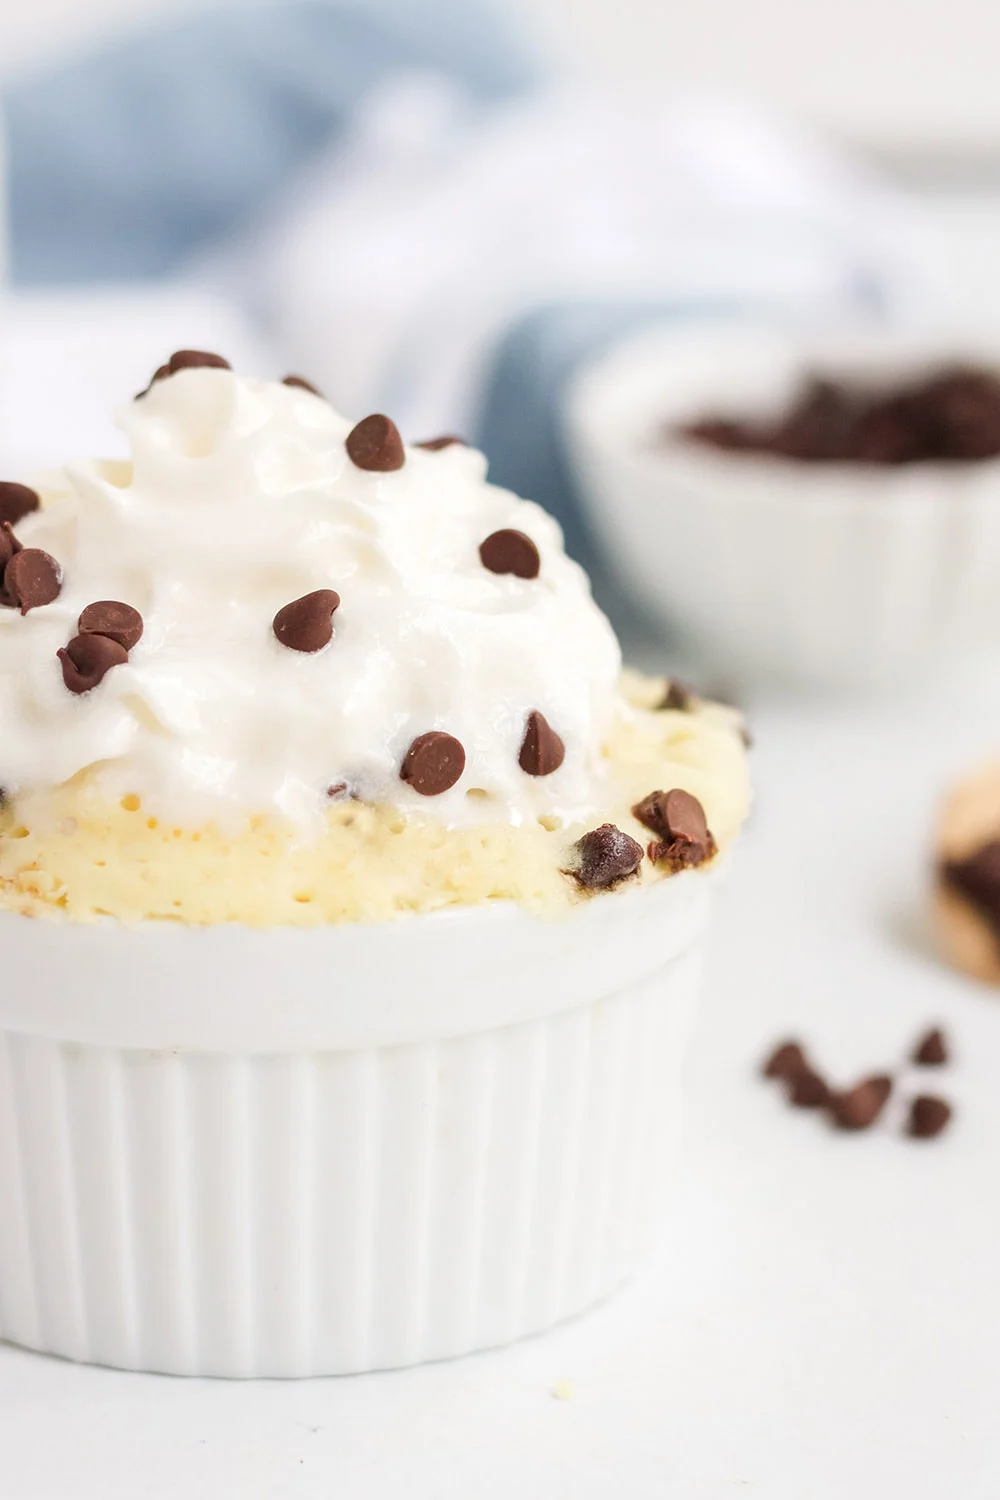 Ramekin of chocolate chip cake topped with whipped cream and chips.